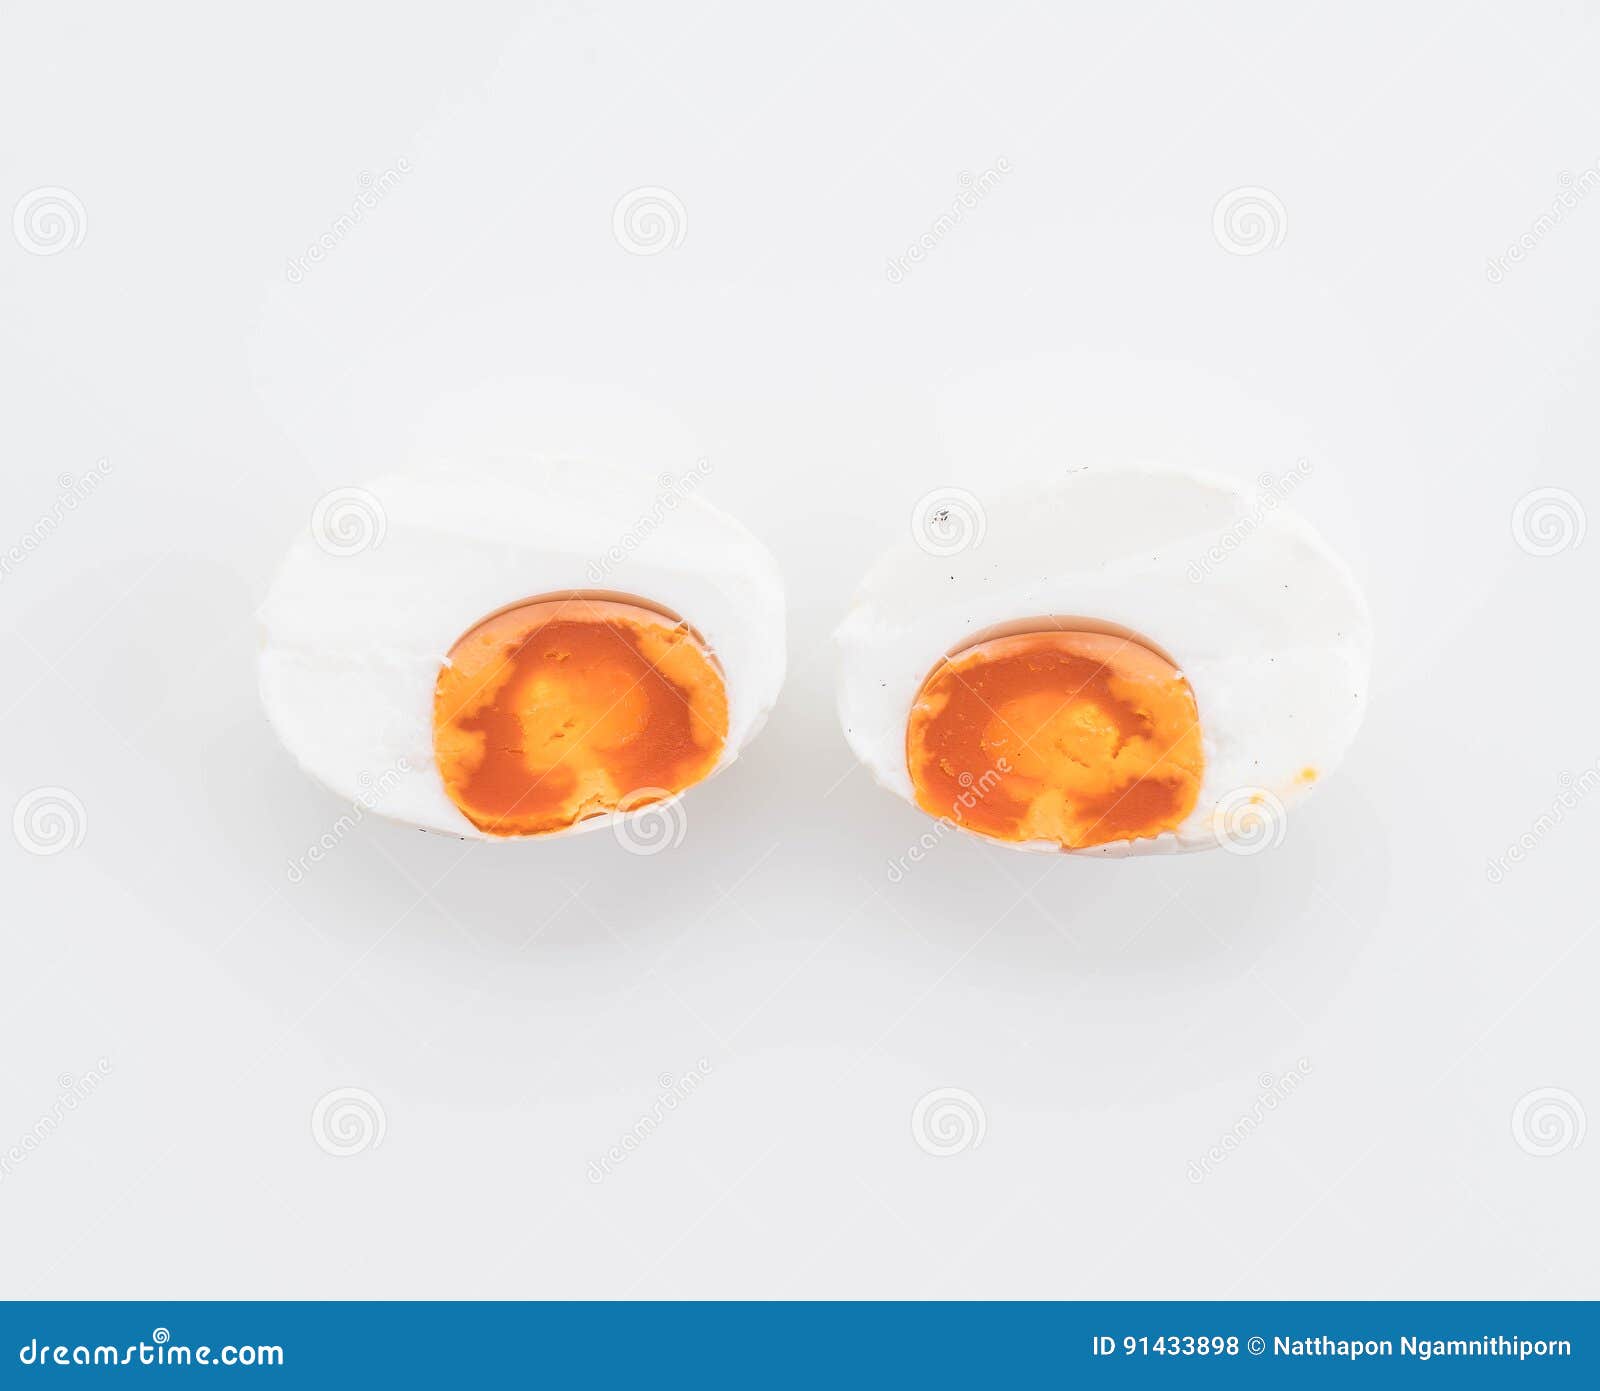 Salted Duck Eggs On White Background Stock Photo - Download Image